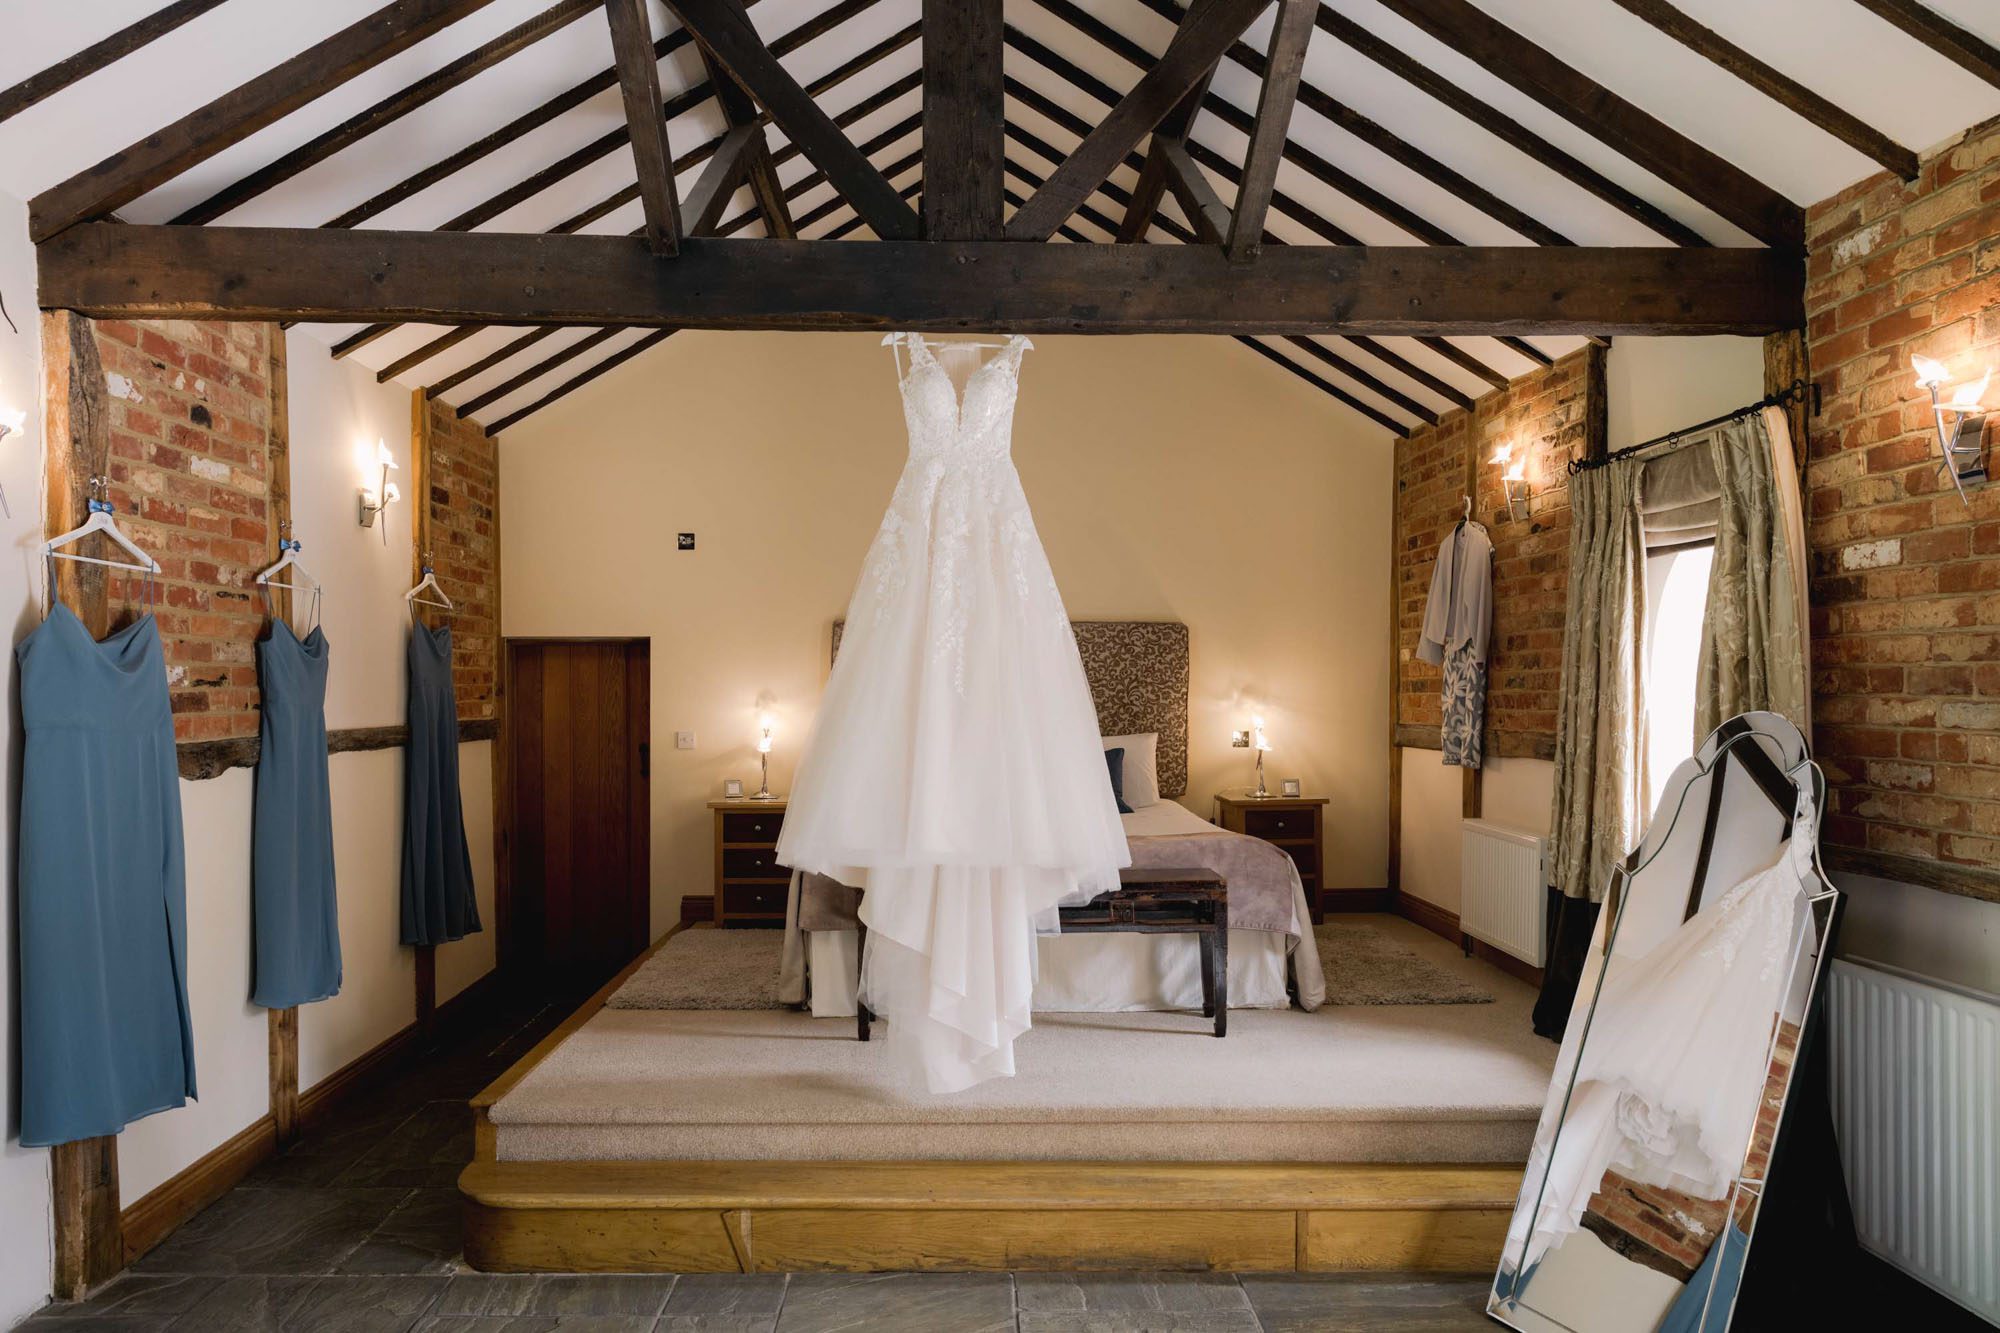 Wedding dress hung on the beams at Rivervale Barn in Hampshire.